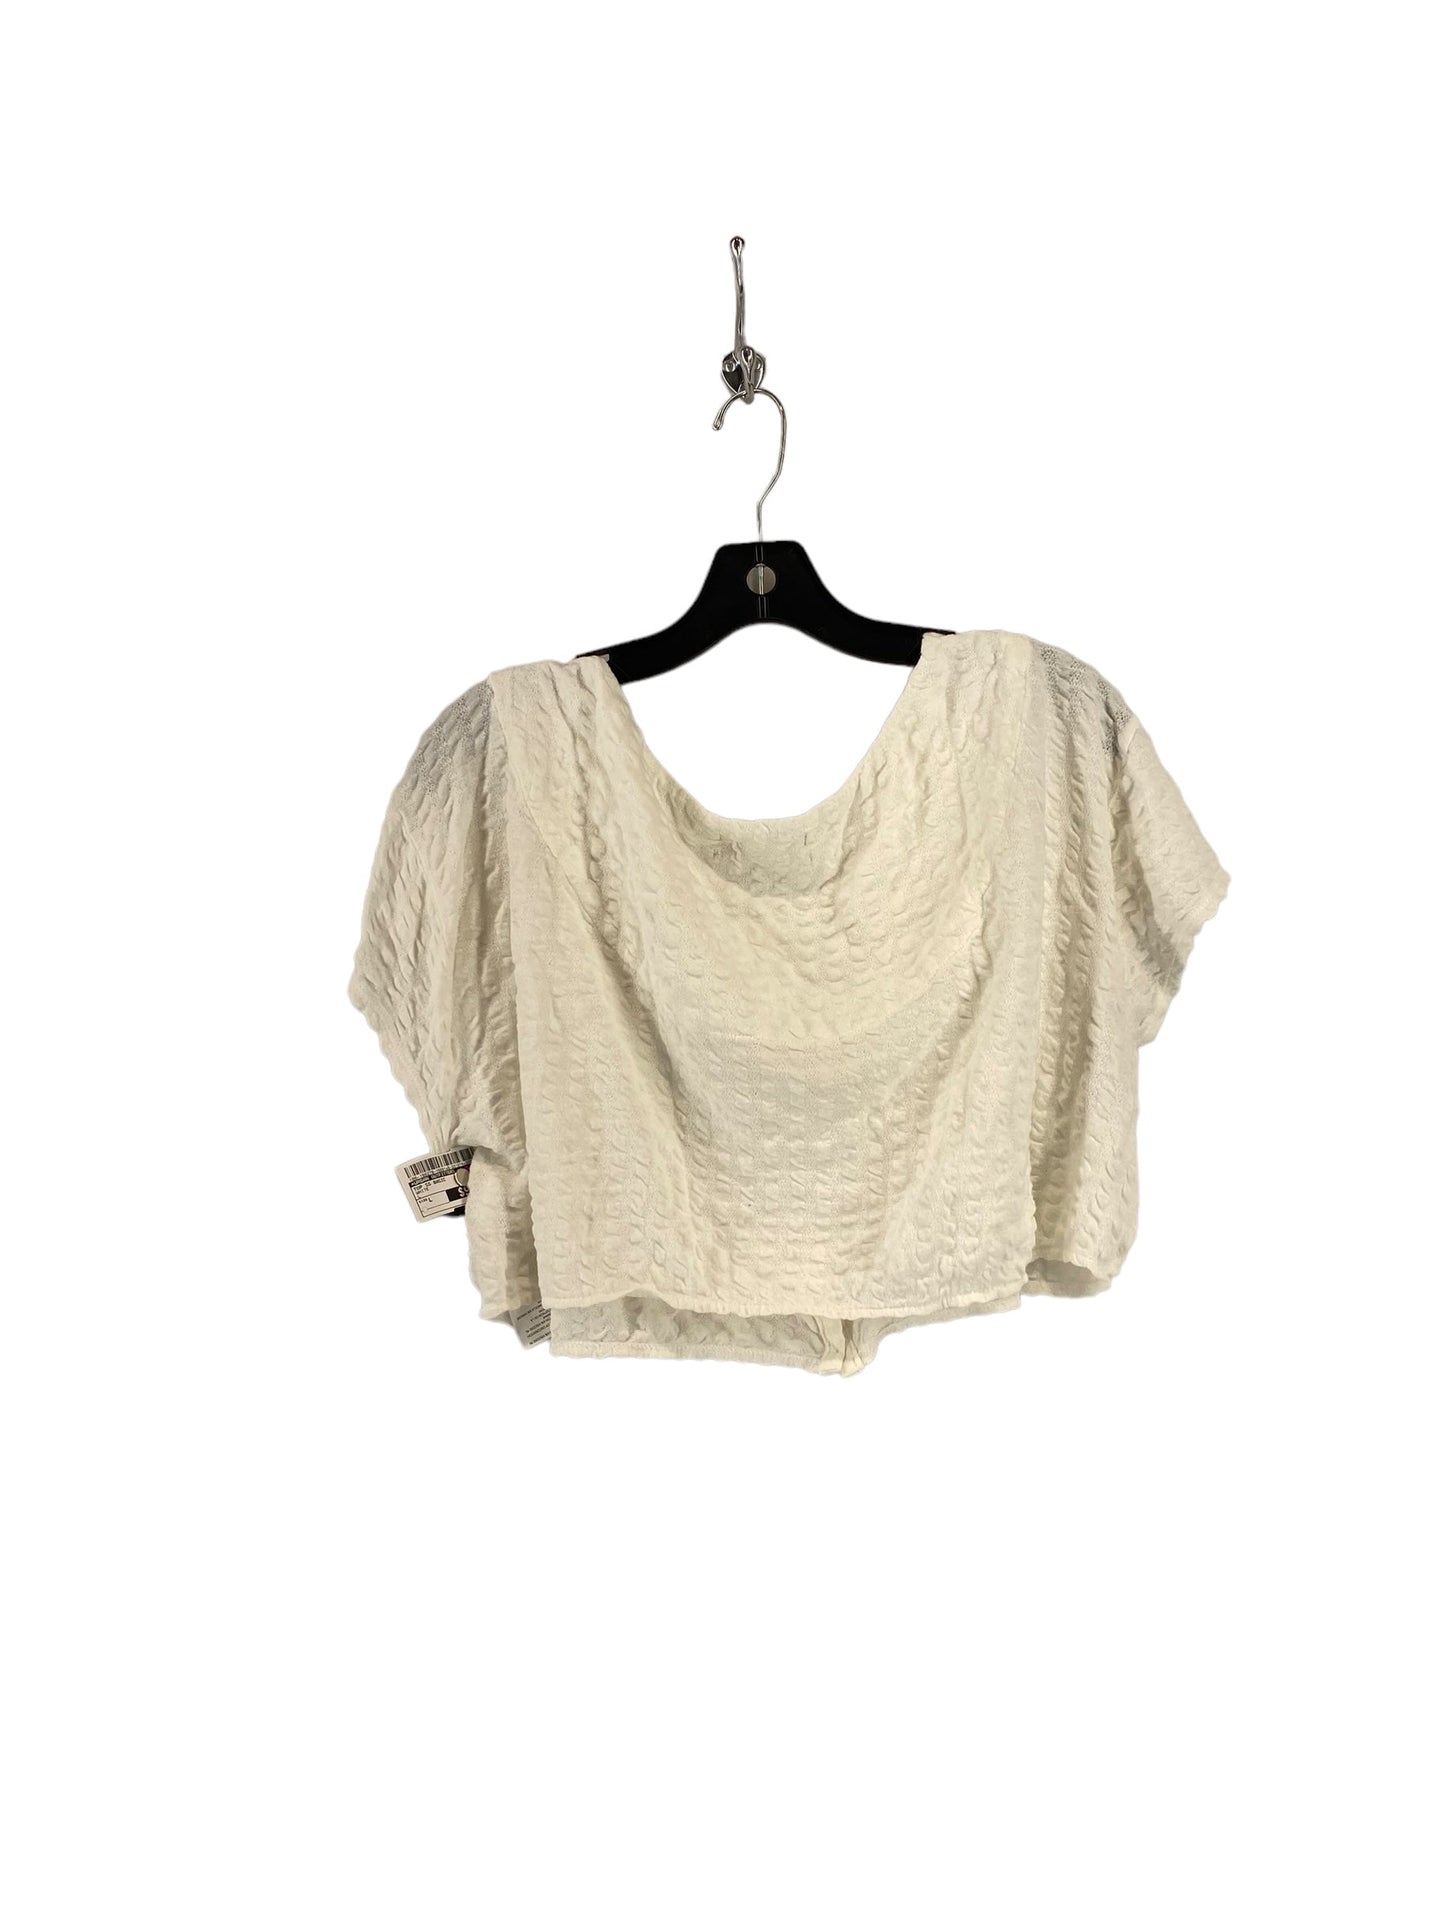 White Top Short Sleeve Basic Urban Outfitters, Size L